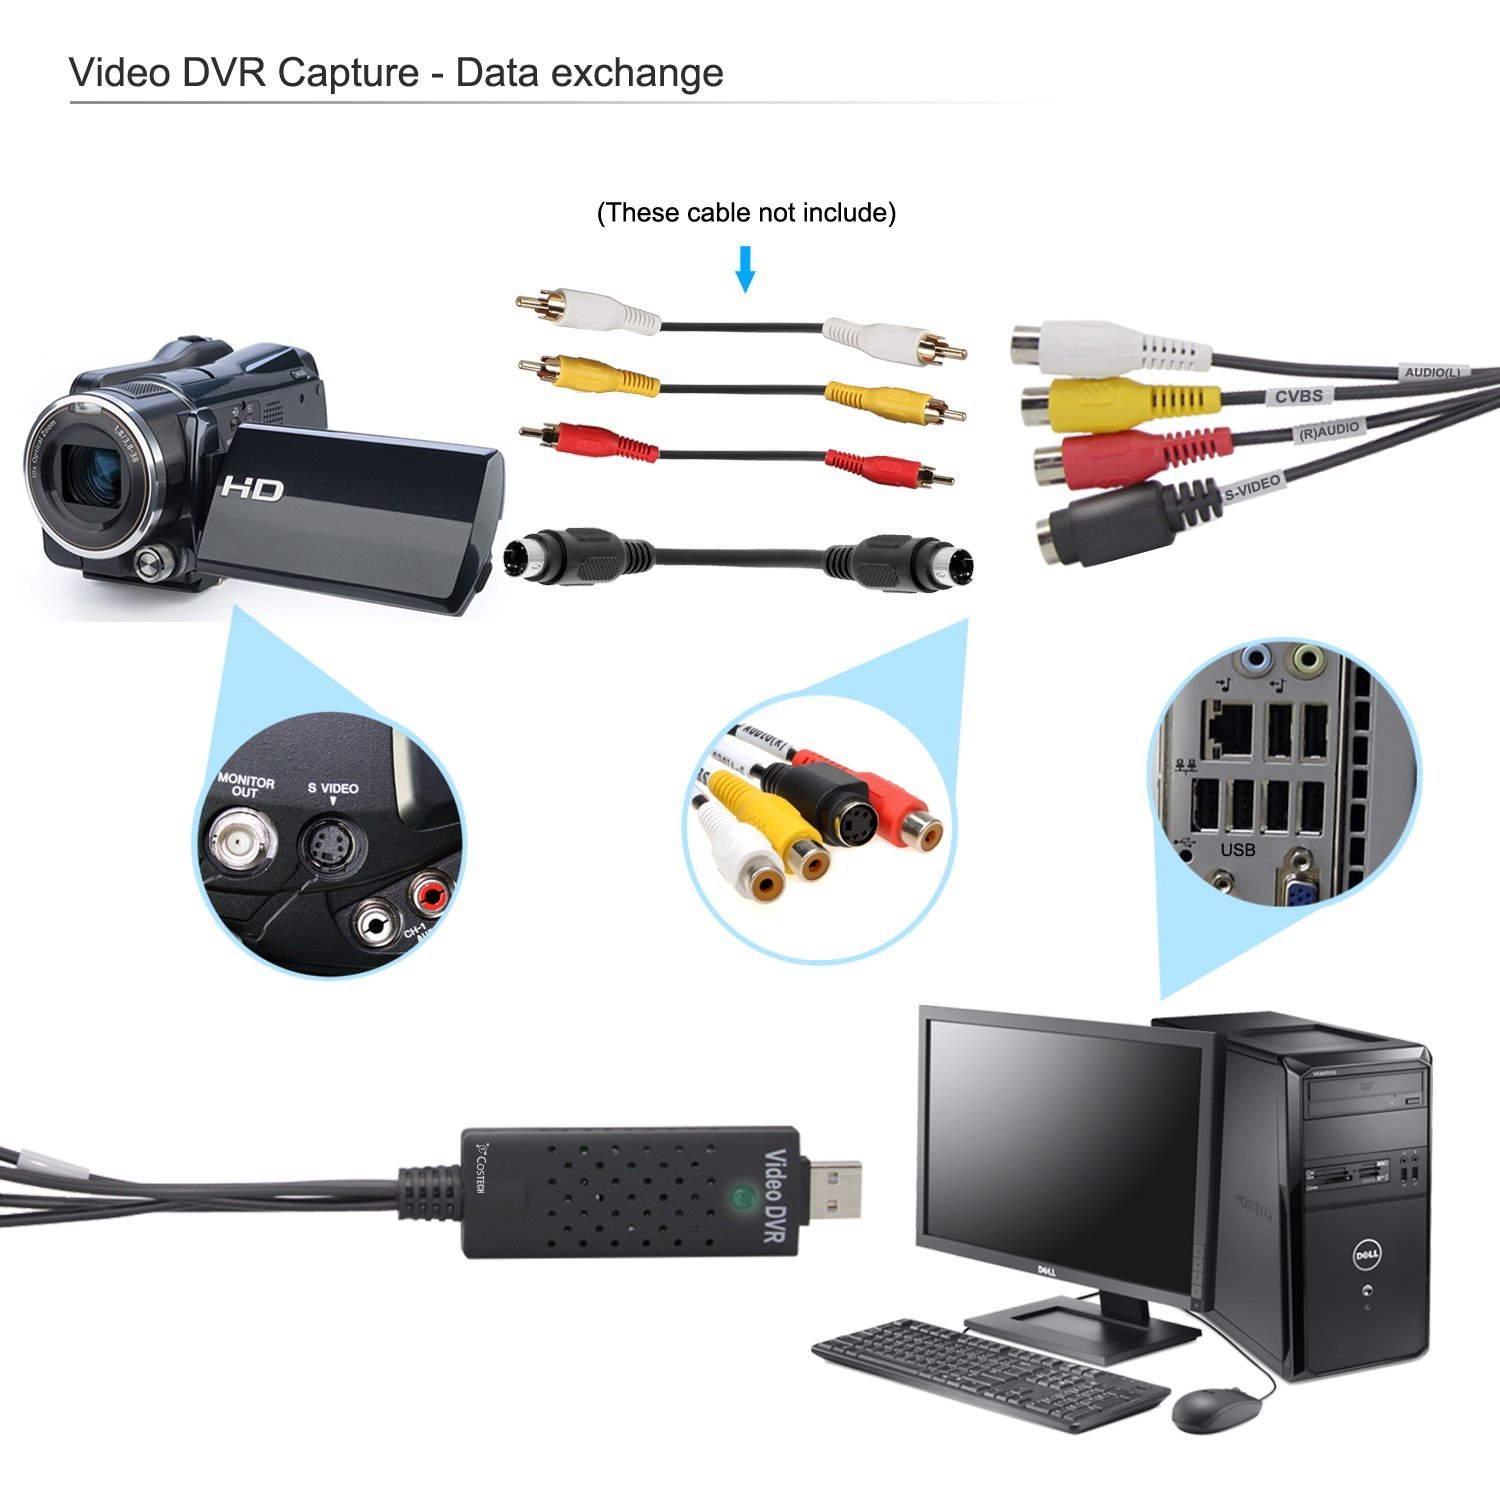 VHS to Digital Converter USB 2.0 Video Audio Capture Card Box VCR DVD TV To Digital Adapter - image 2 of 9